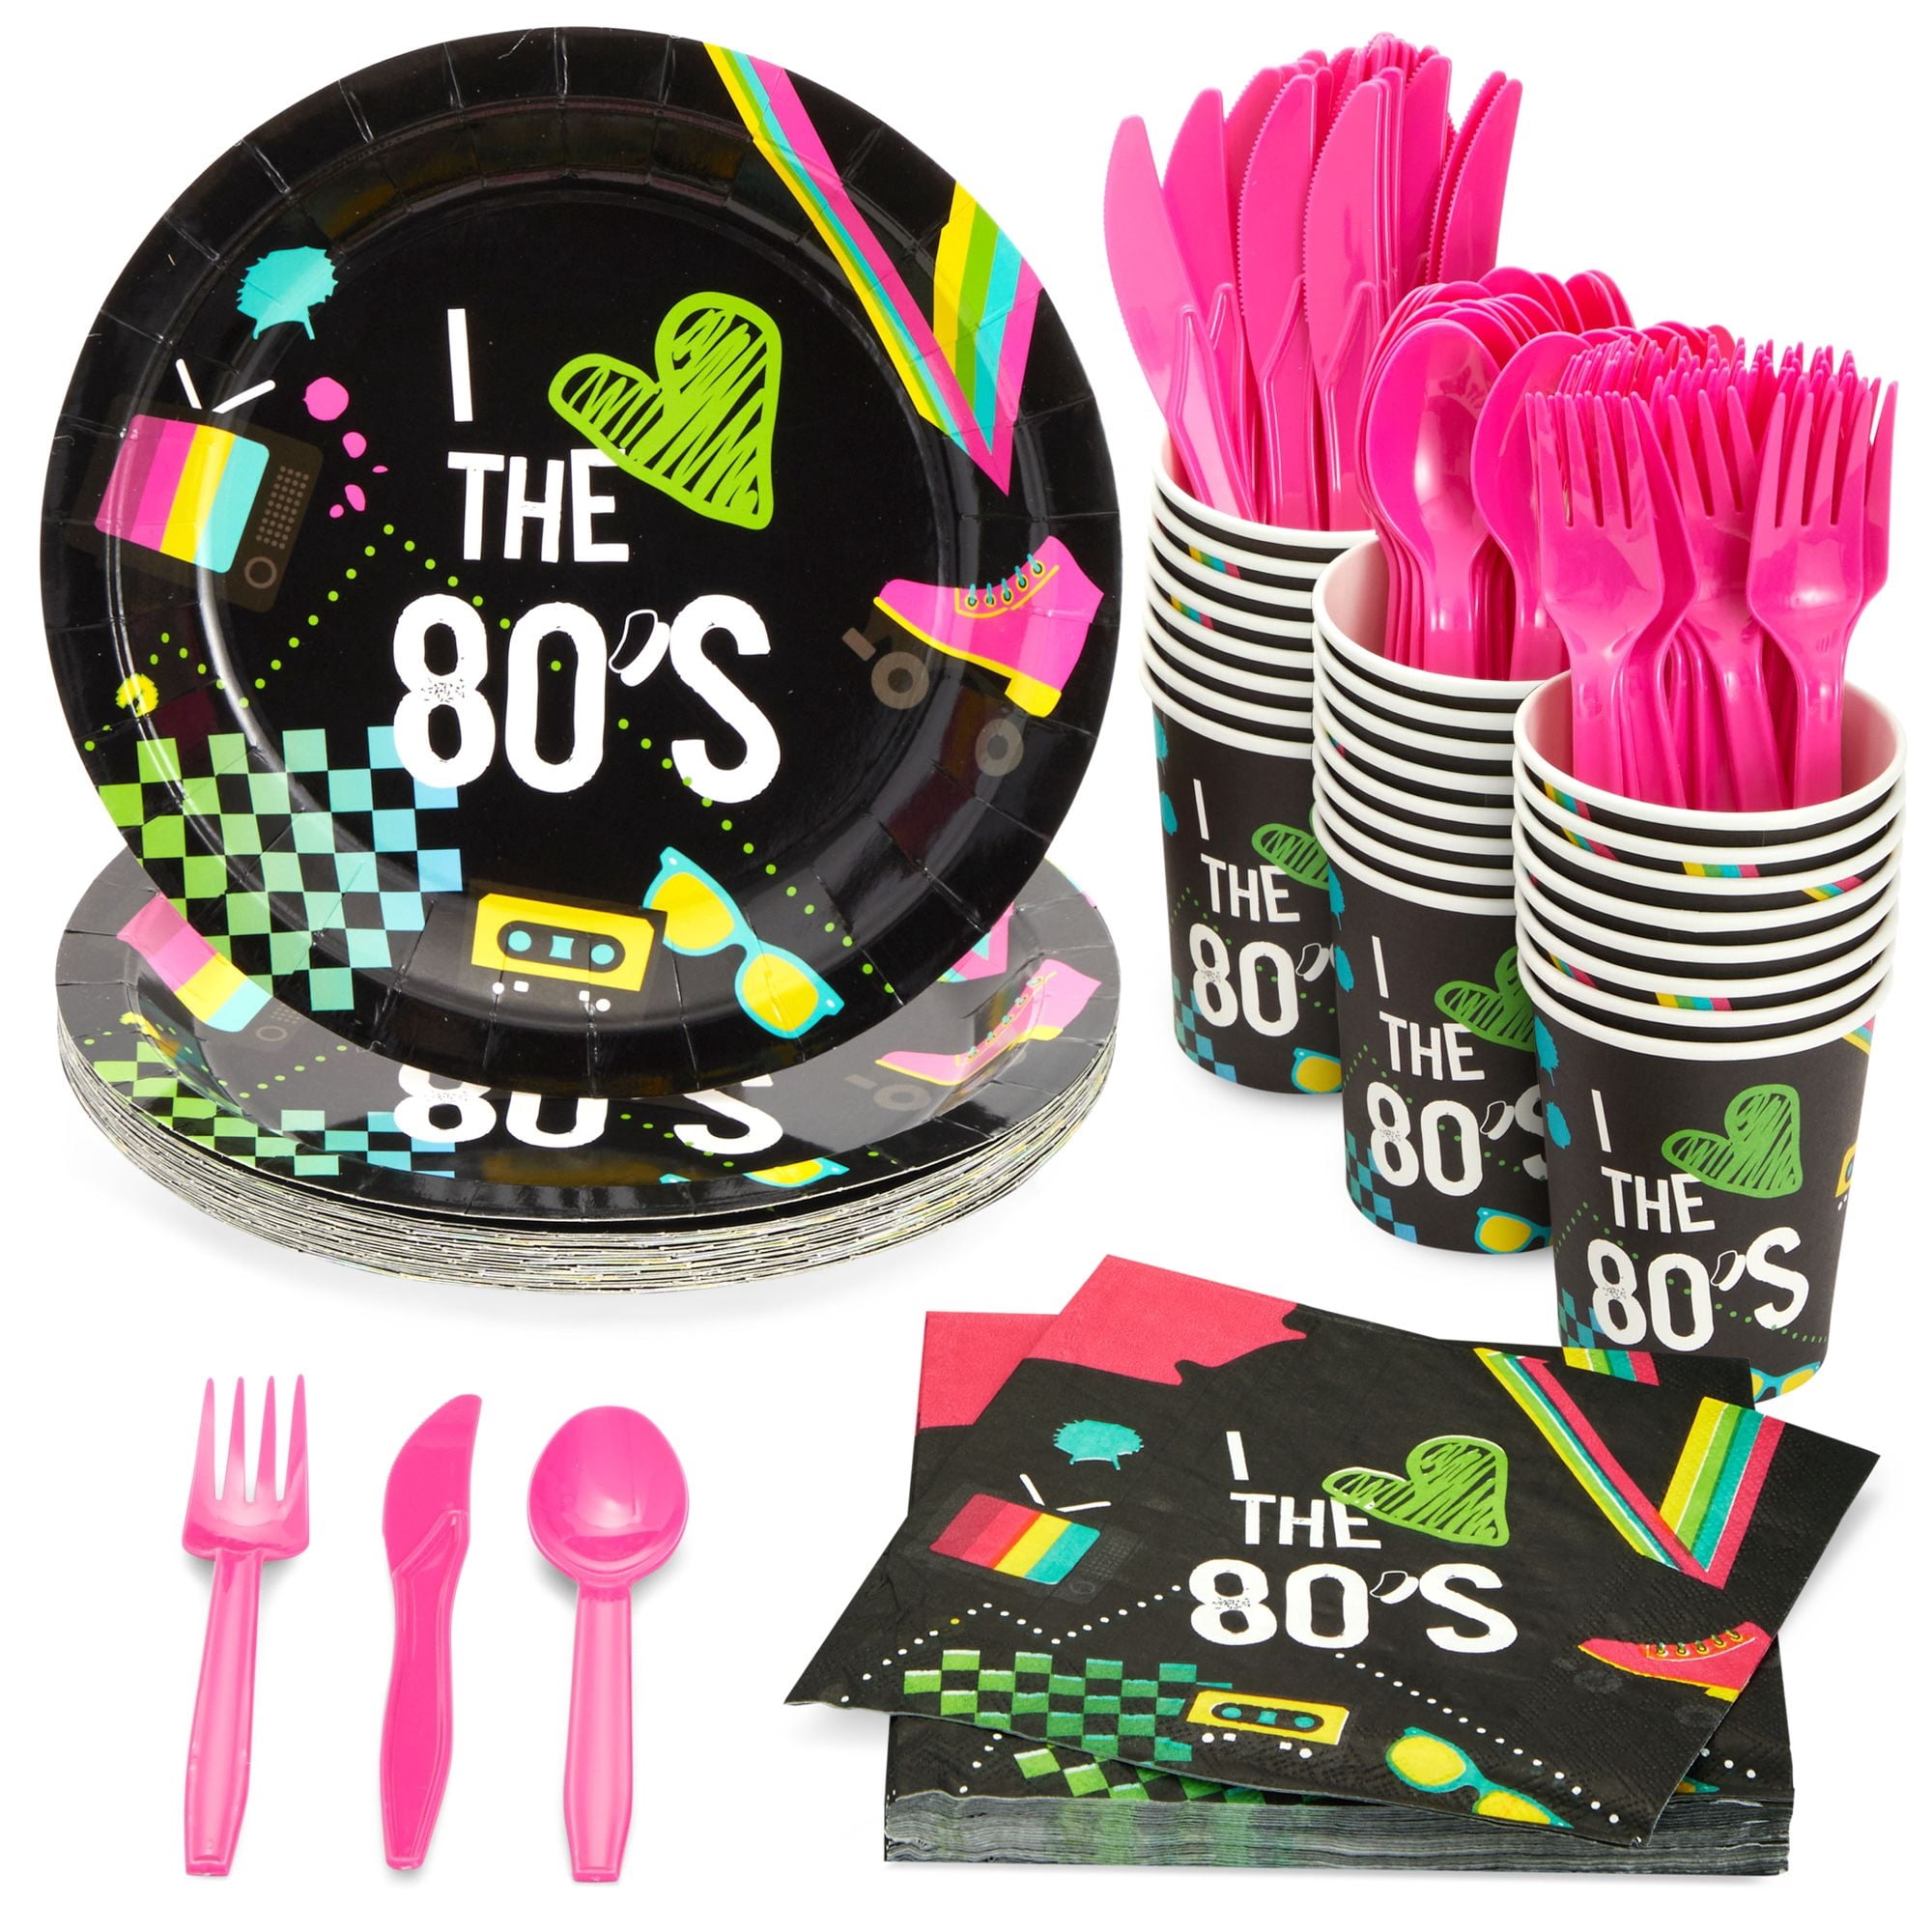 Serves 24 80s Birthday Party Decorations, Includes Plates, Napkins ...